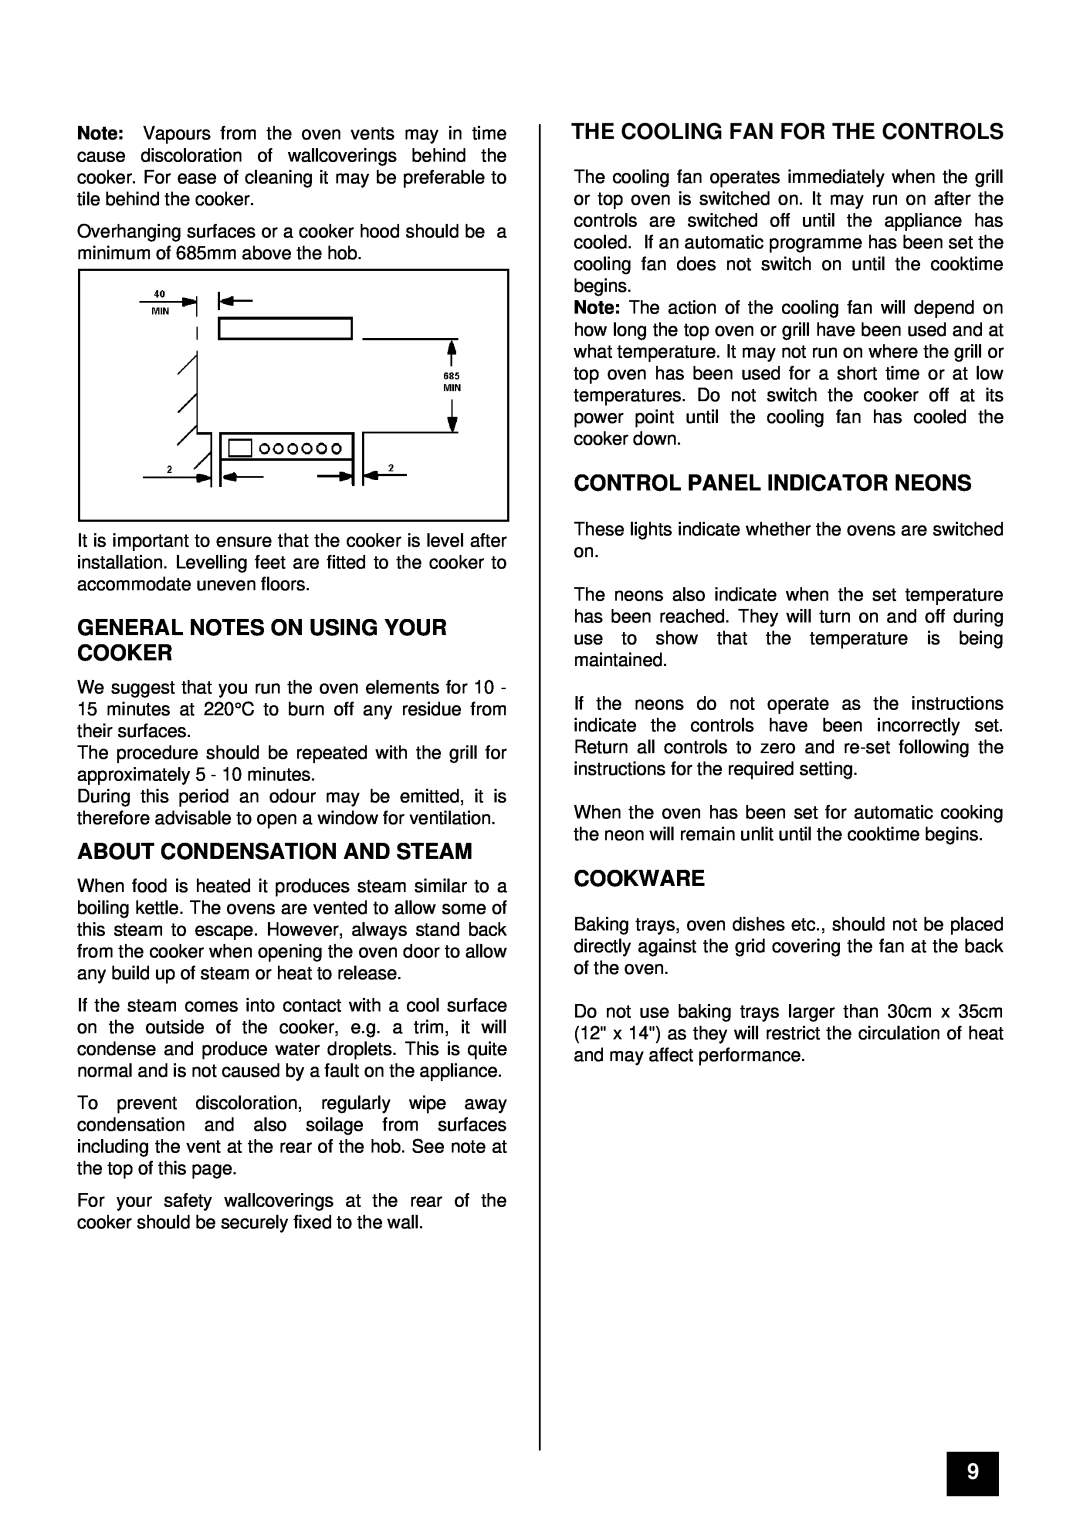 Zanussi ZCE ID manual General Notes On Using Your Cooker, About Condensation And Steam, The Cooling Fan For The Controls 